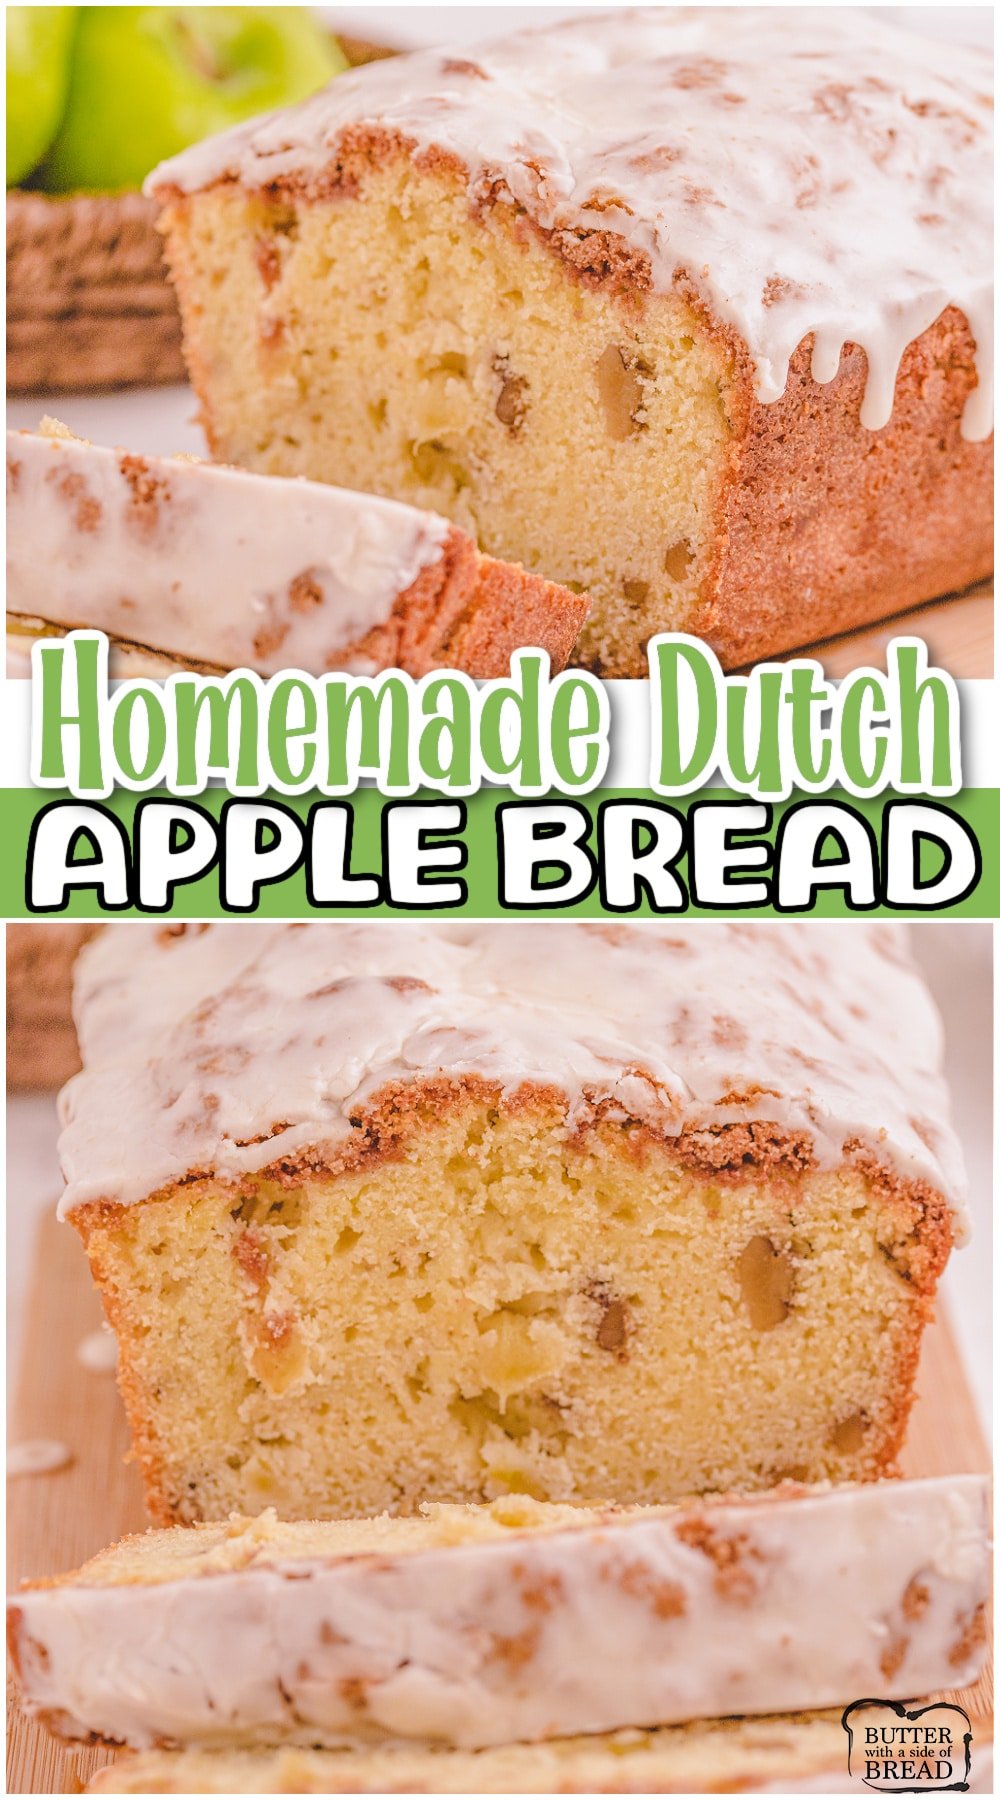 Dutch Apple Bread is made from scratch with butter, sugar and fresh apples. This apple quick bread recipe has amazing flavors and is topped with a cinnamon streusel and drizzled with warm vanilla glaze.